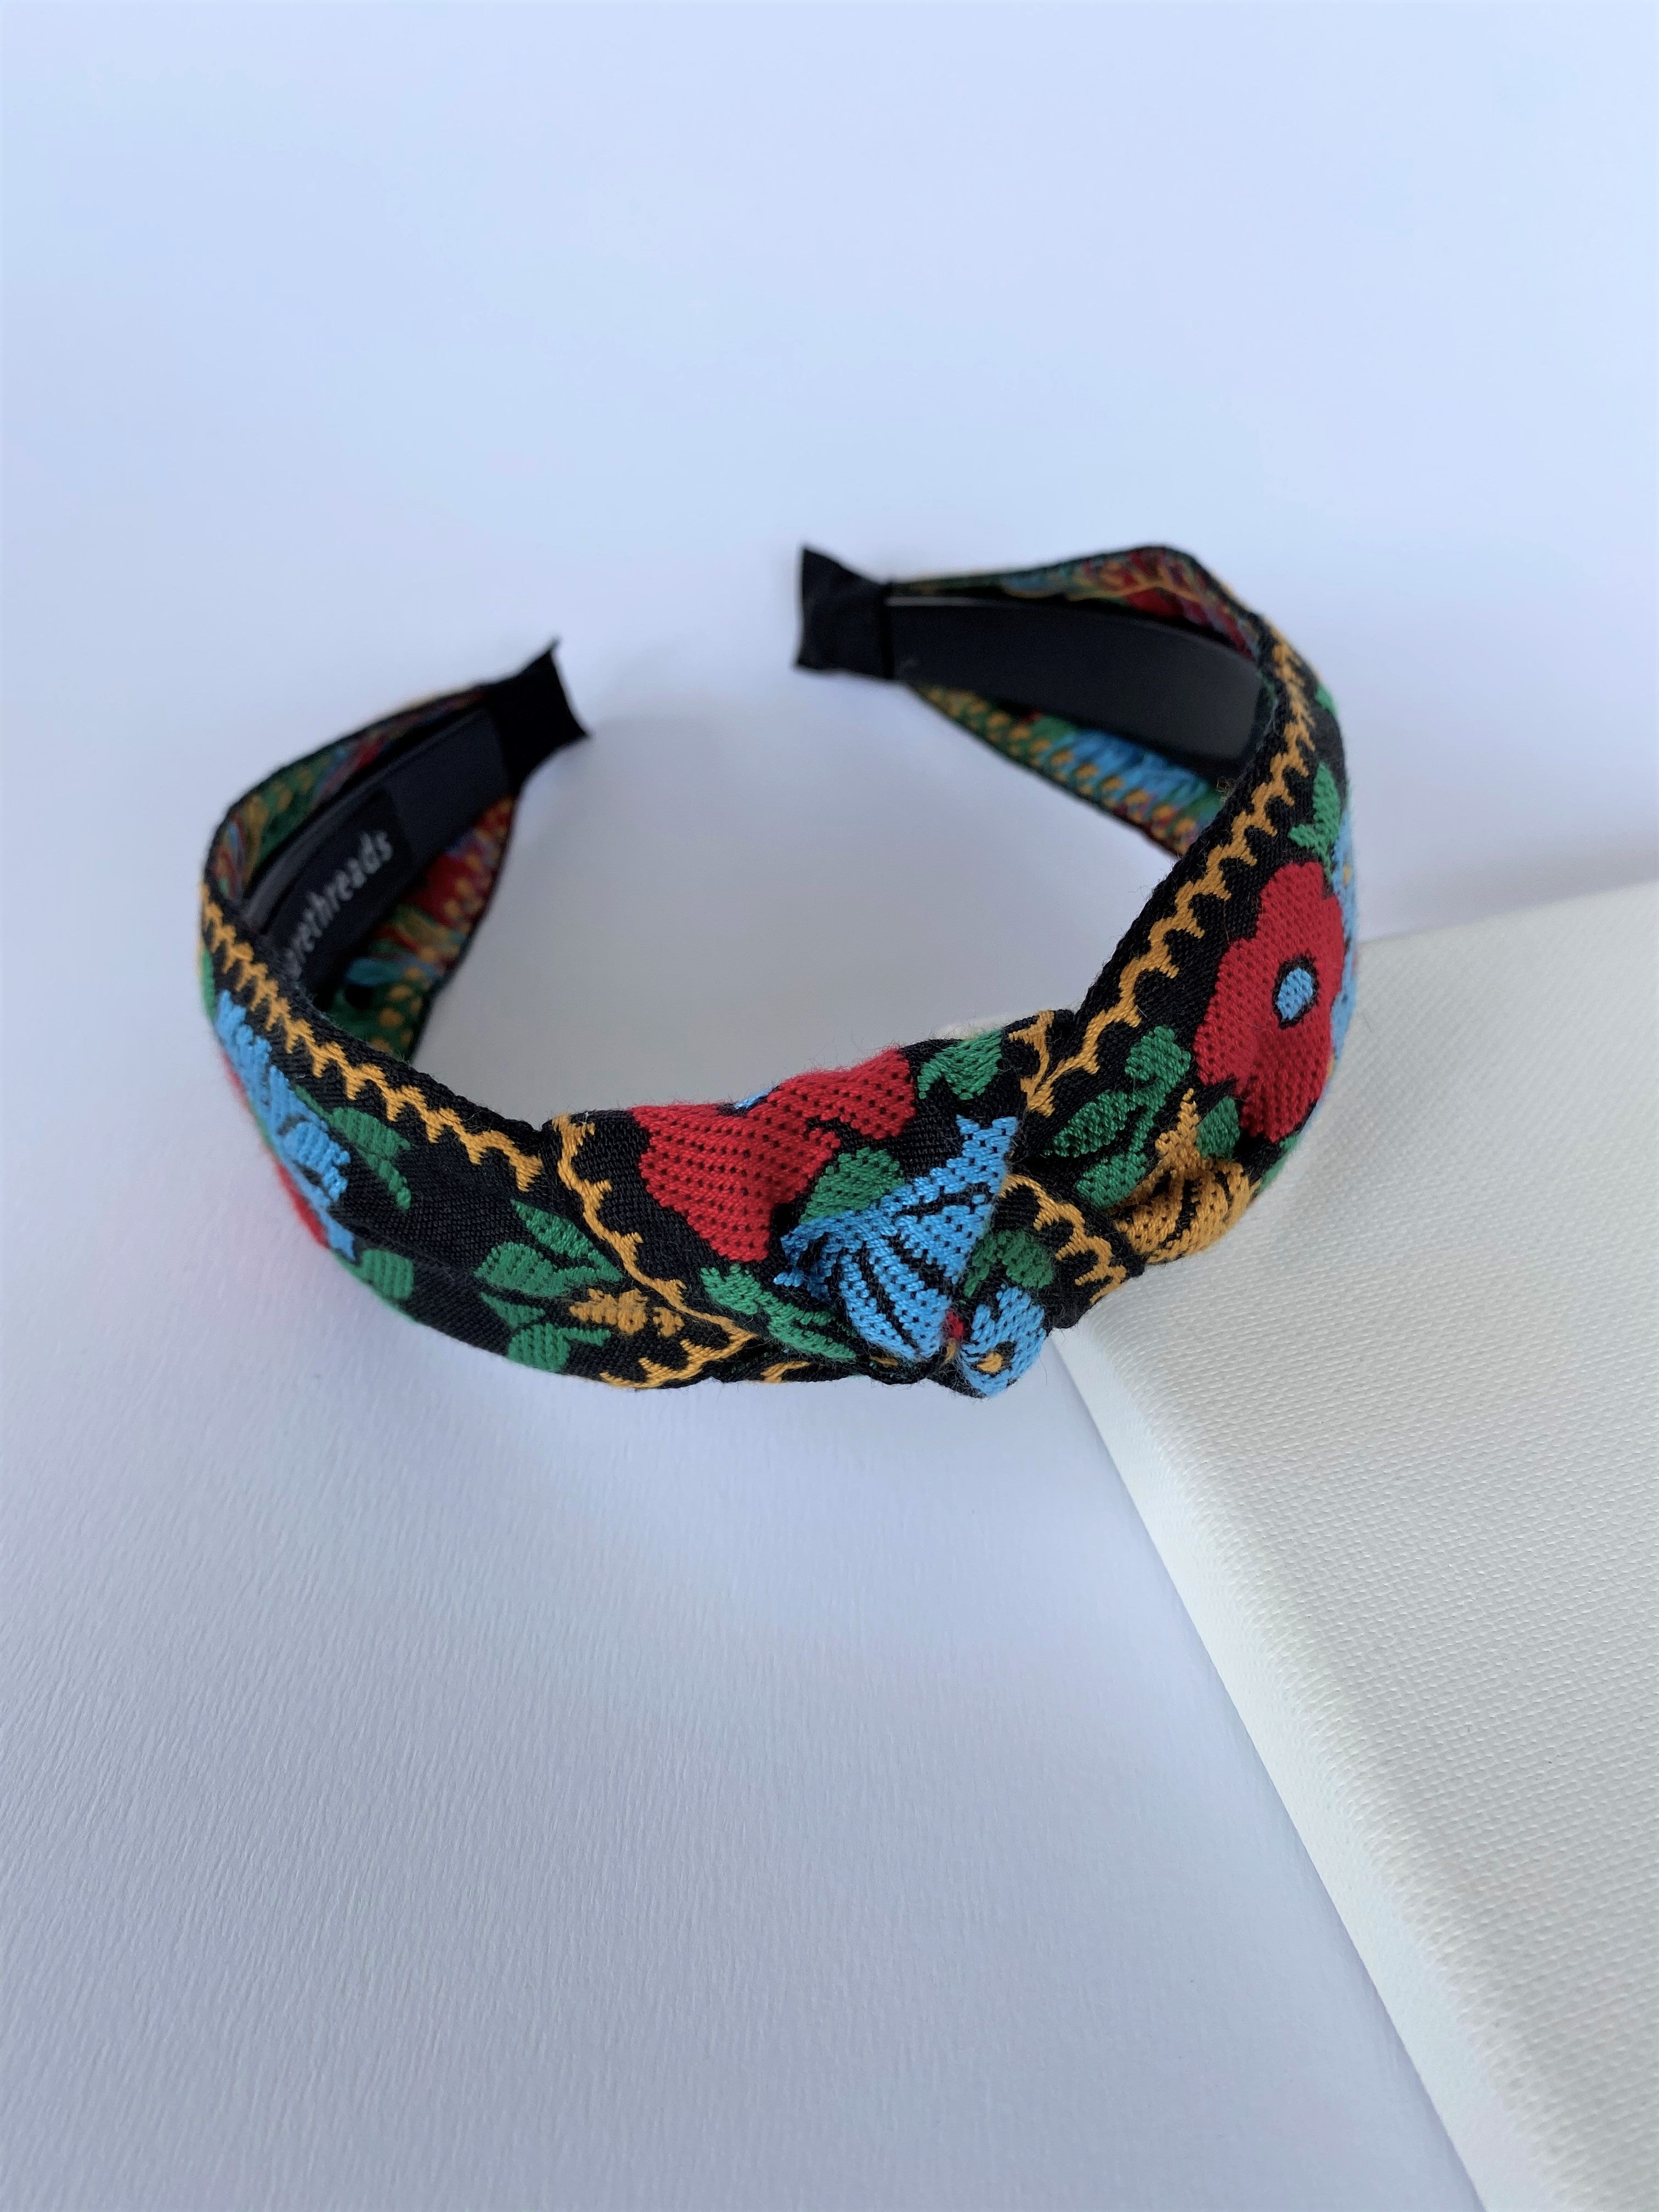 THE FIESTA EMBROIDERED BAND